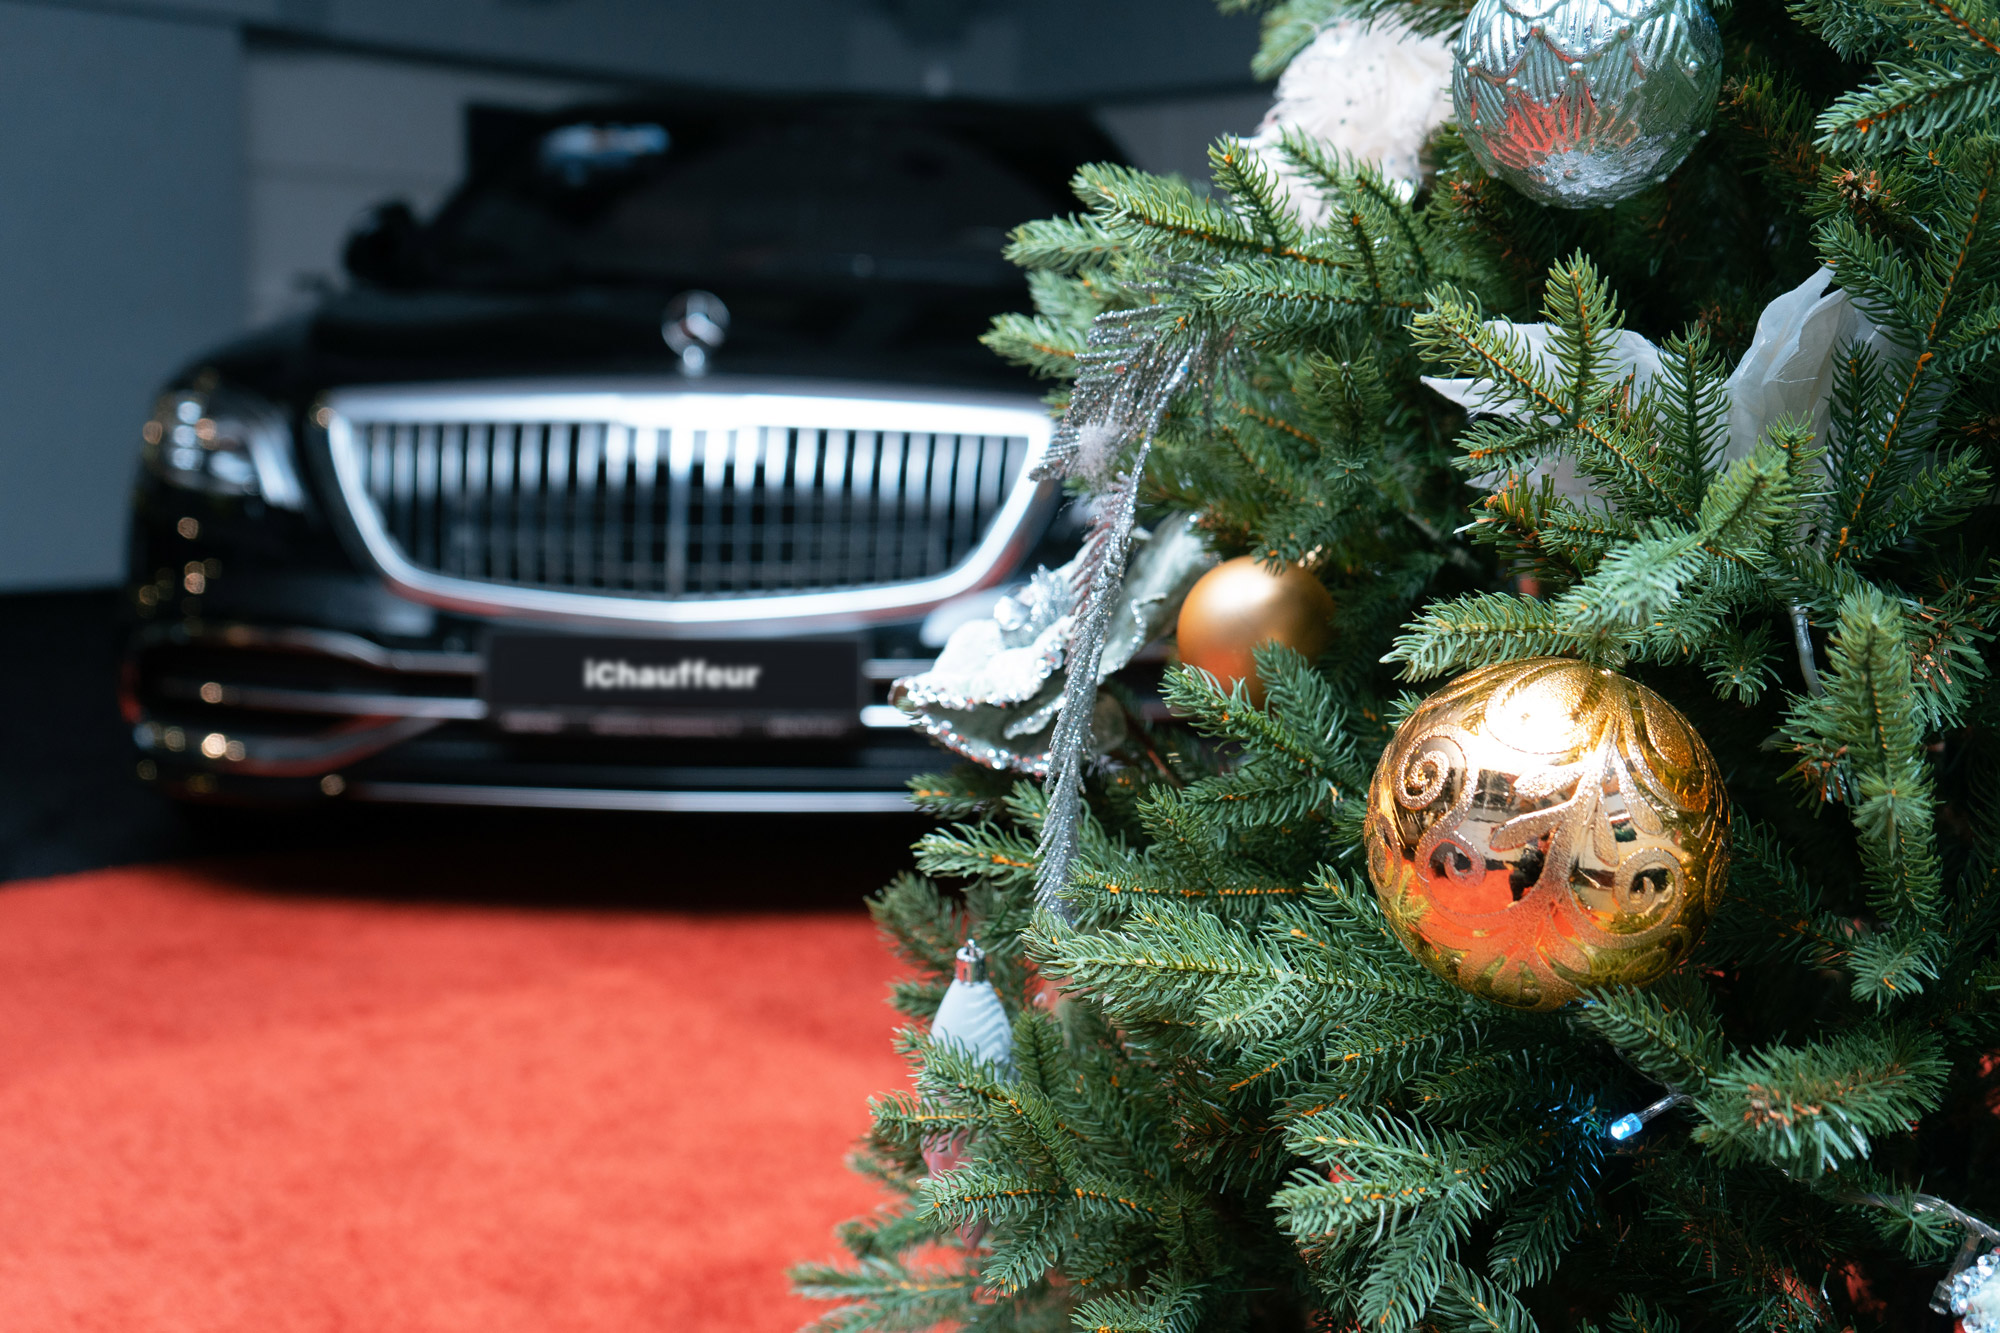 Christmas tree in front of luxury Maybach Mercedes car